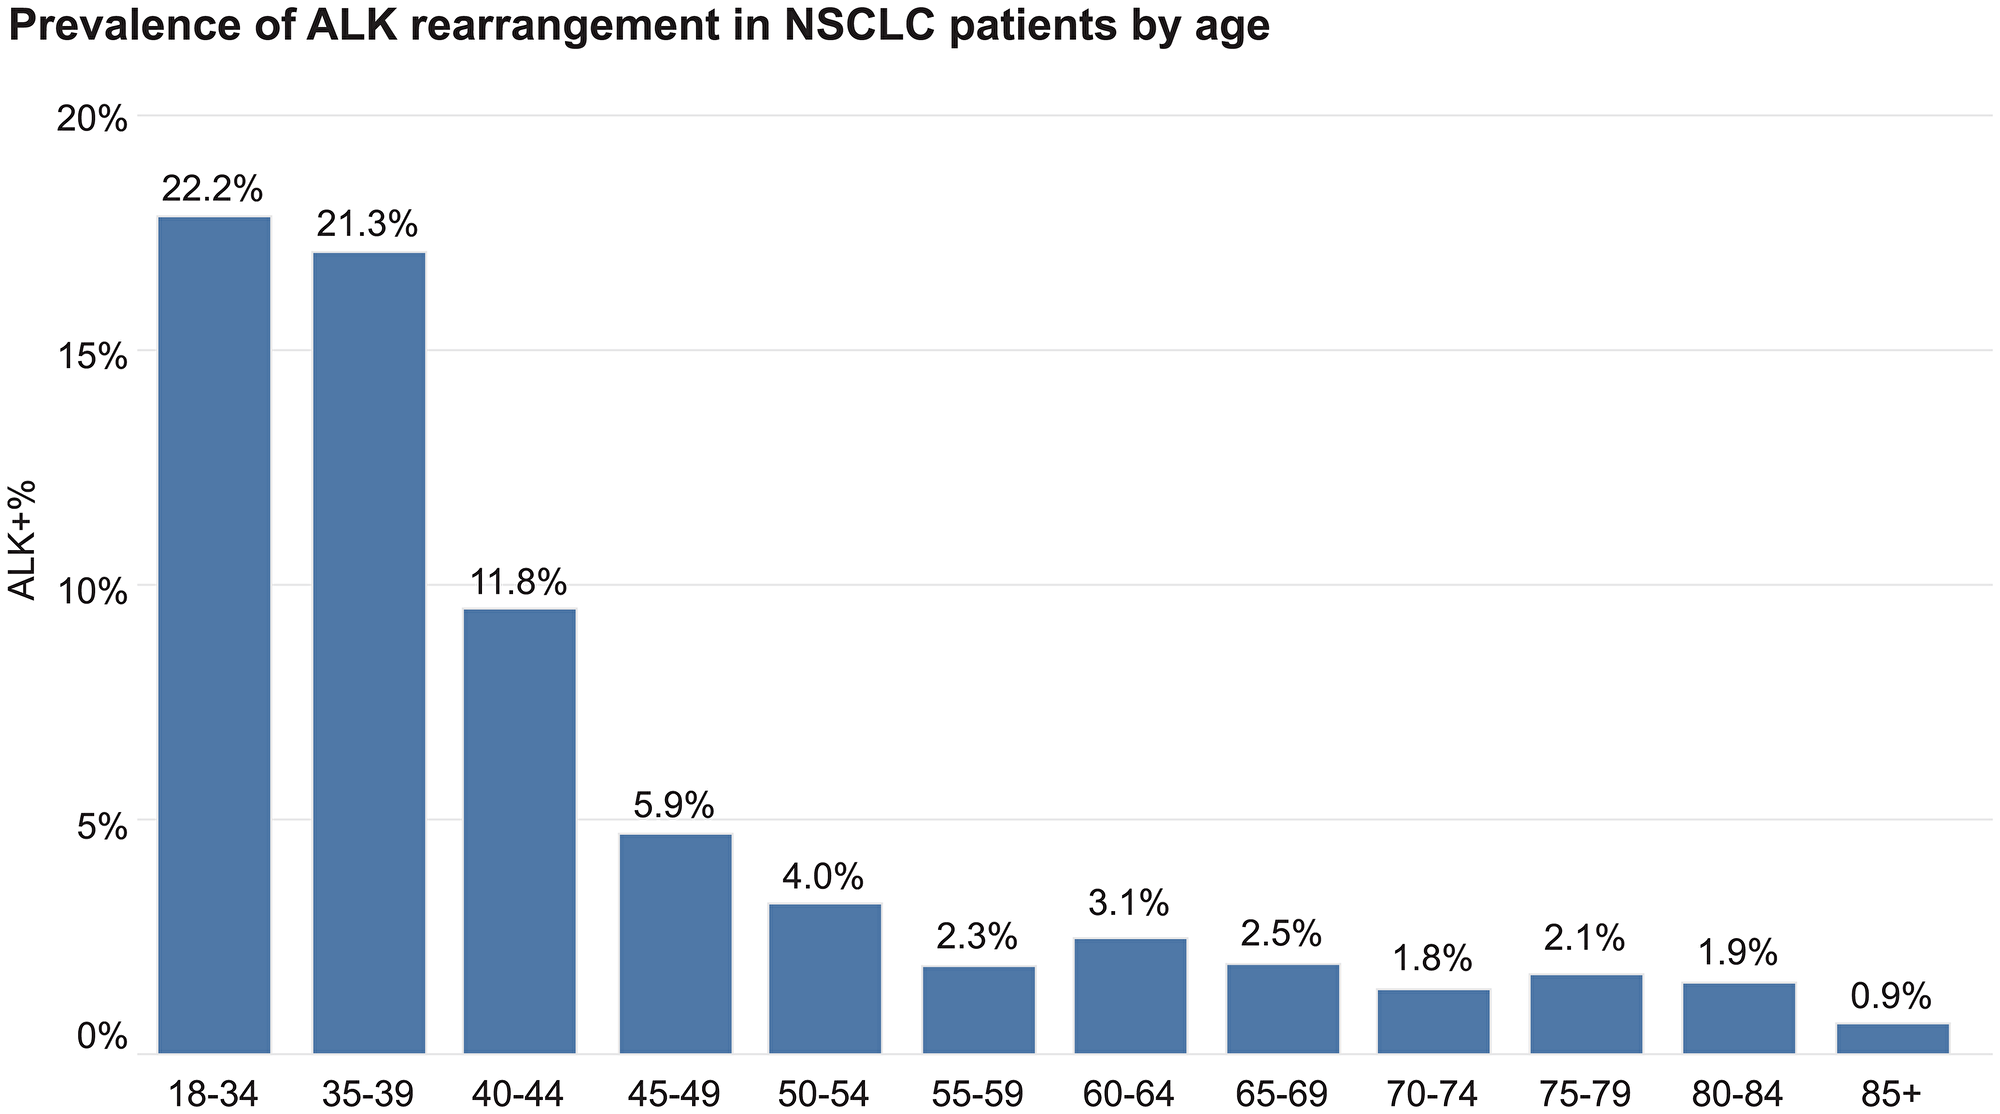 Prevalence of ALK rearrangement in aNSCLC patients by age.